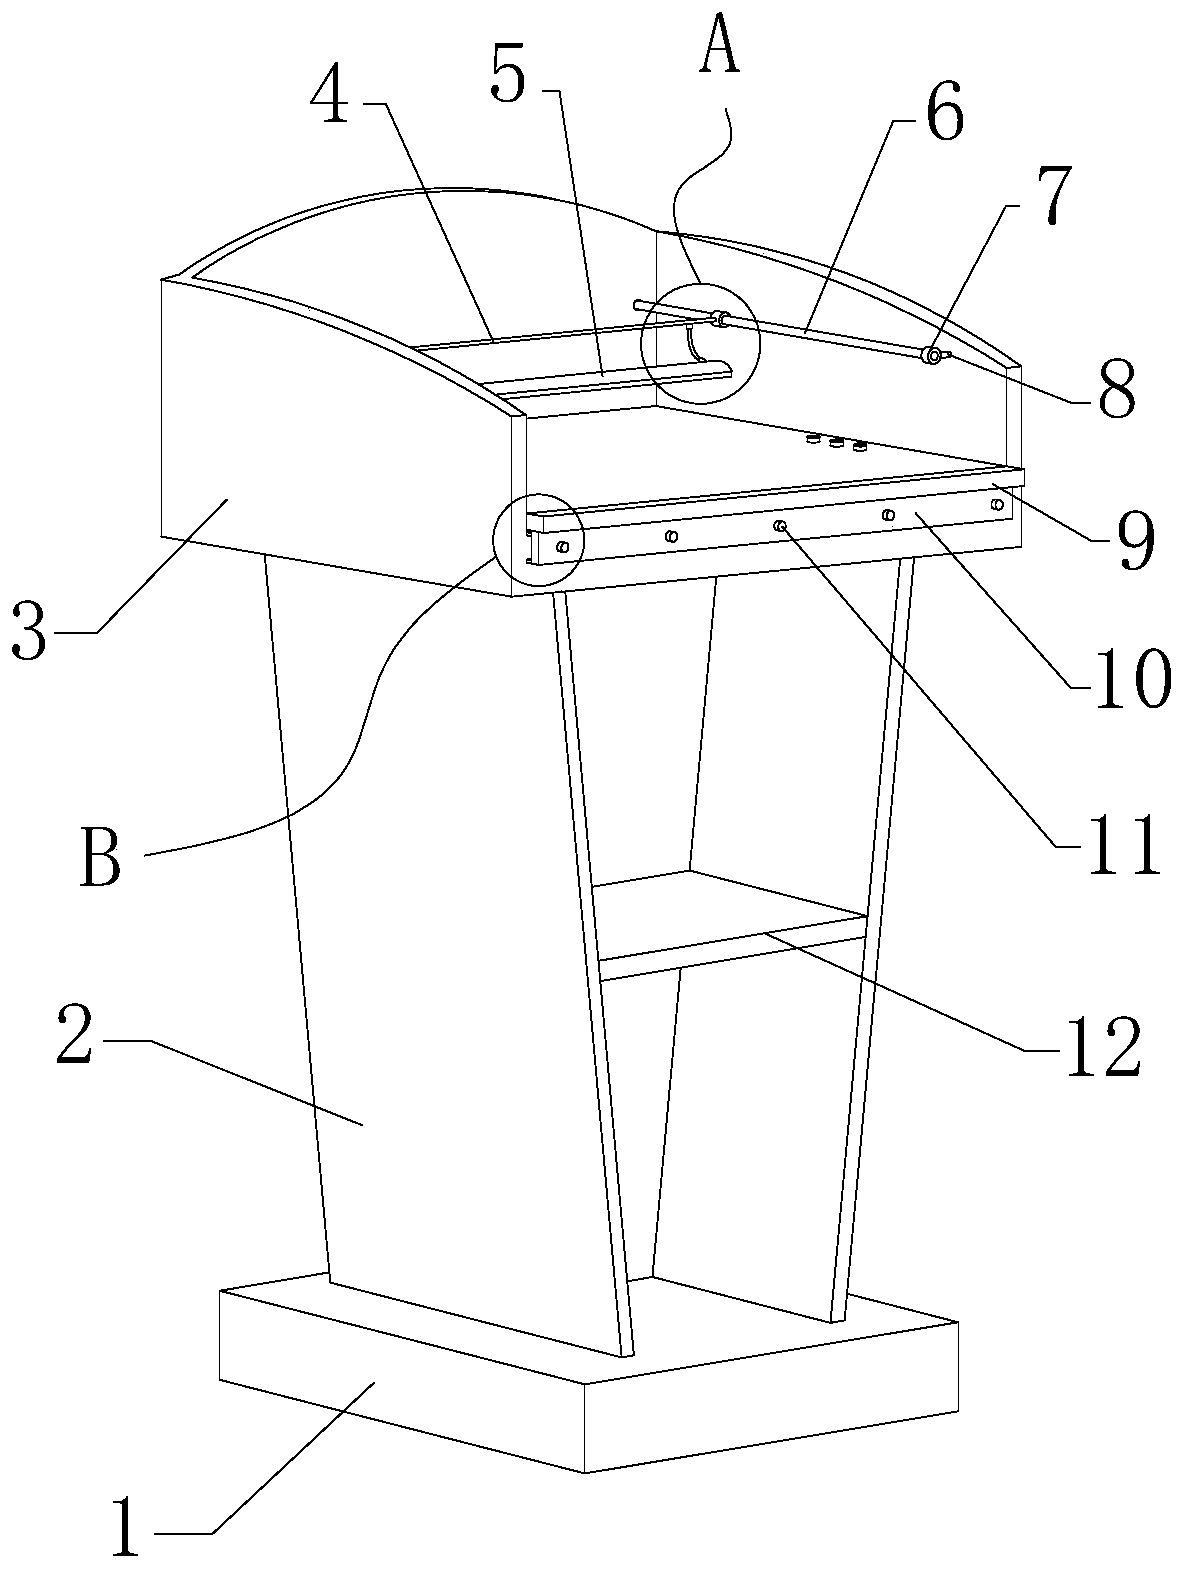 Ideological and political classroom education interaction device